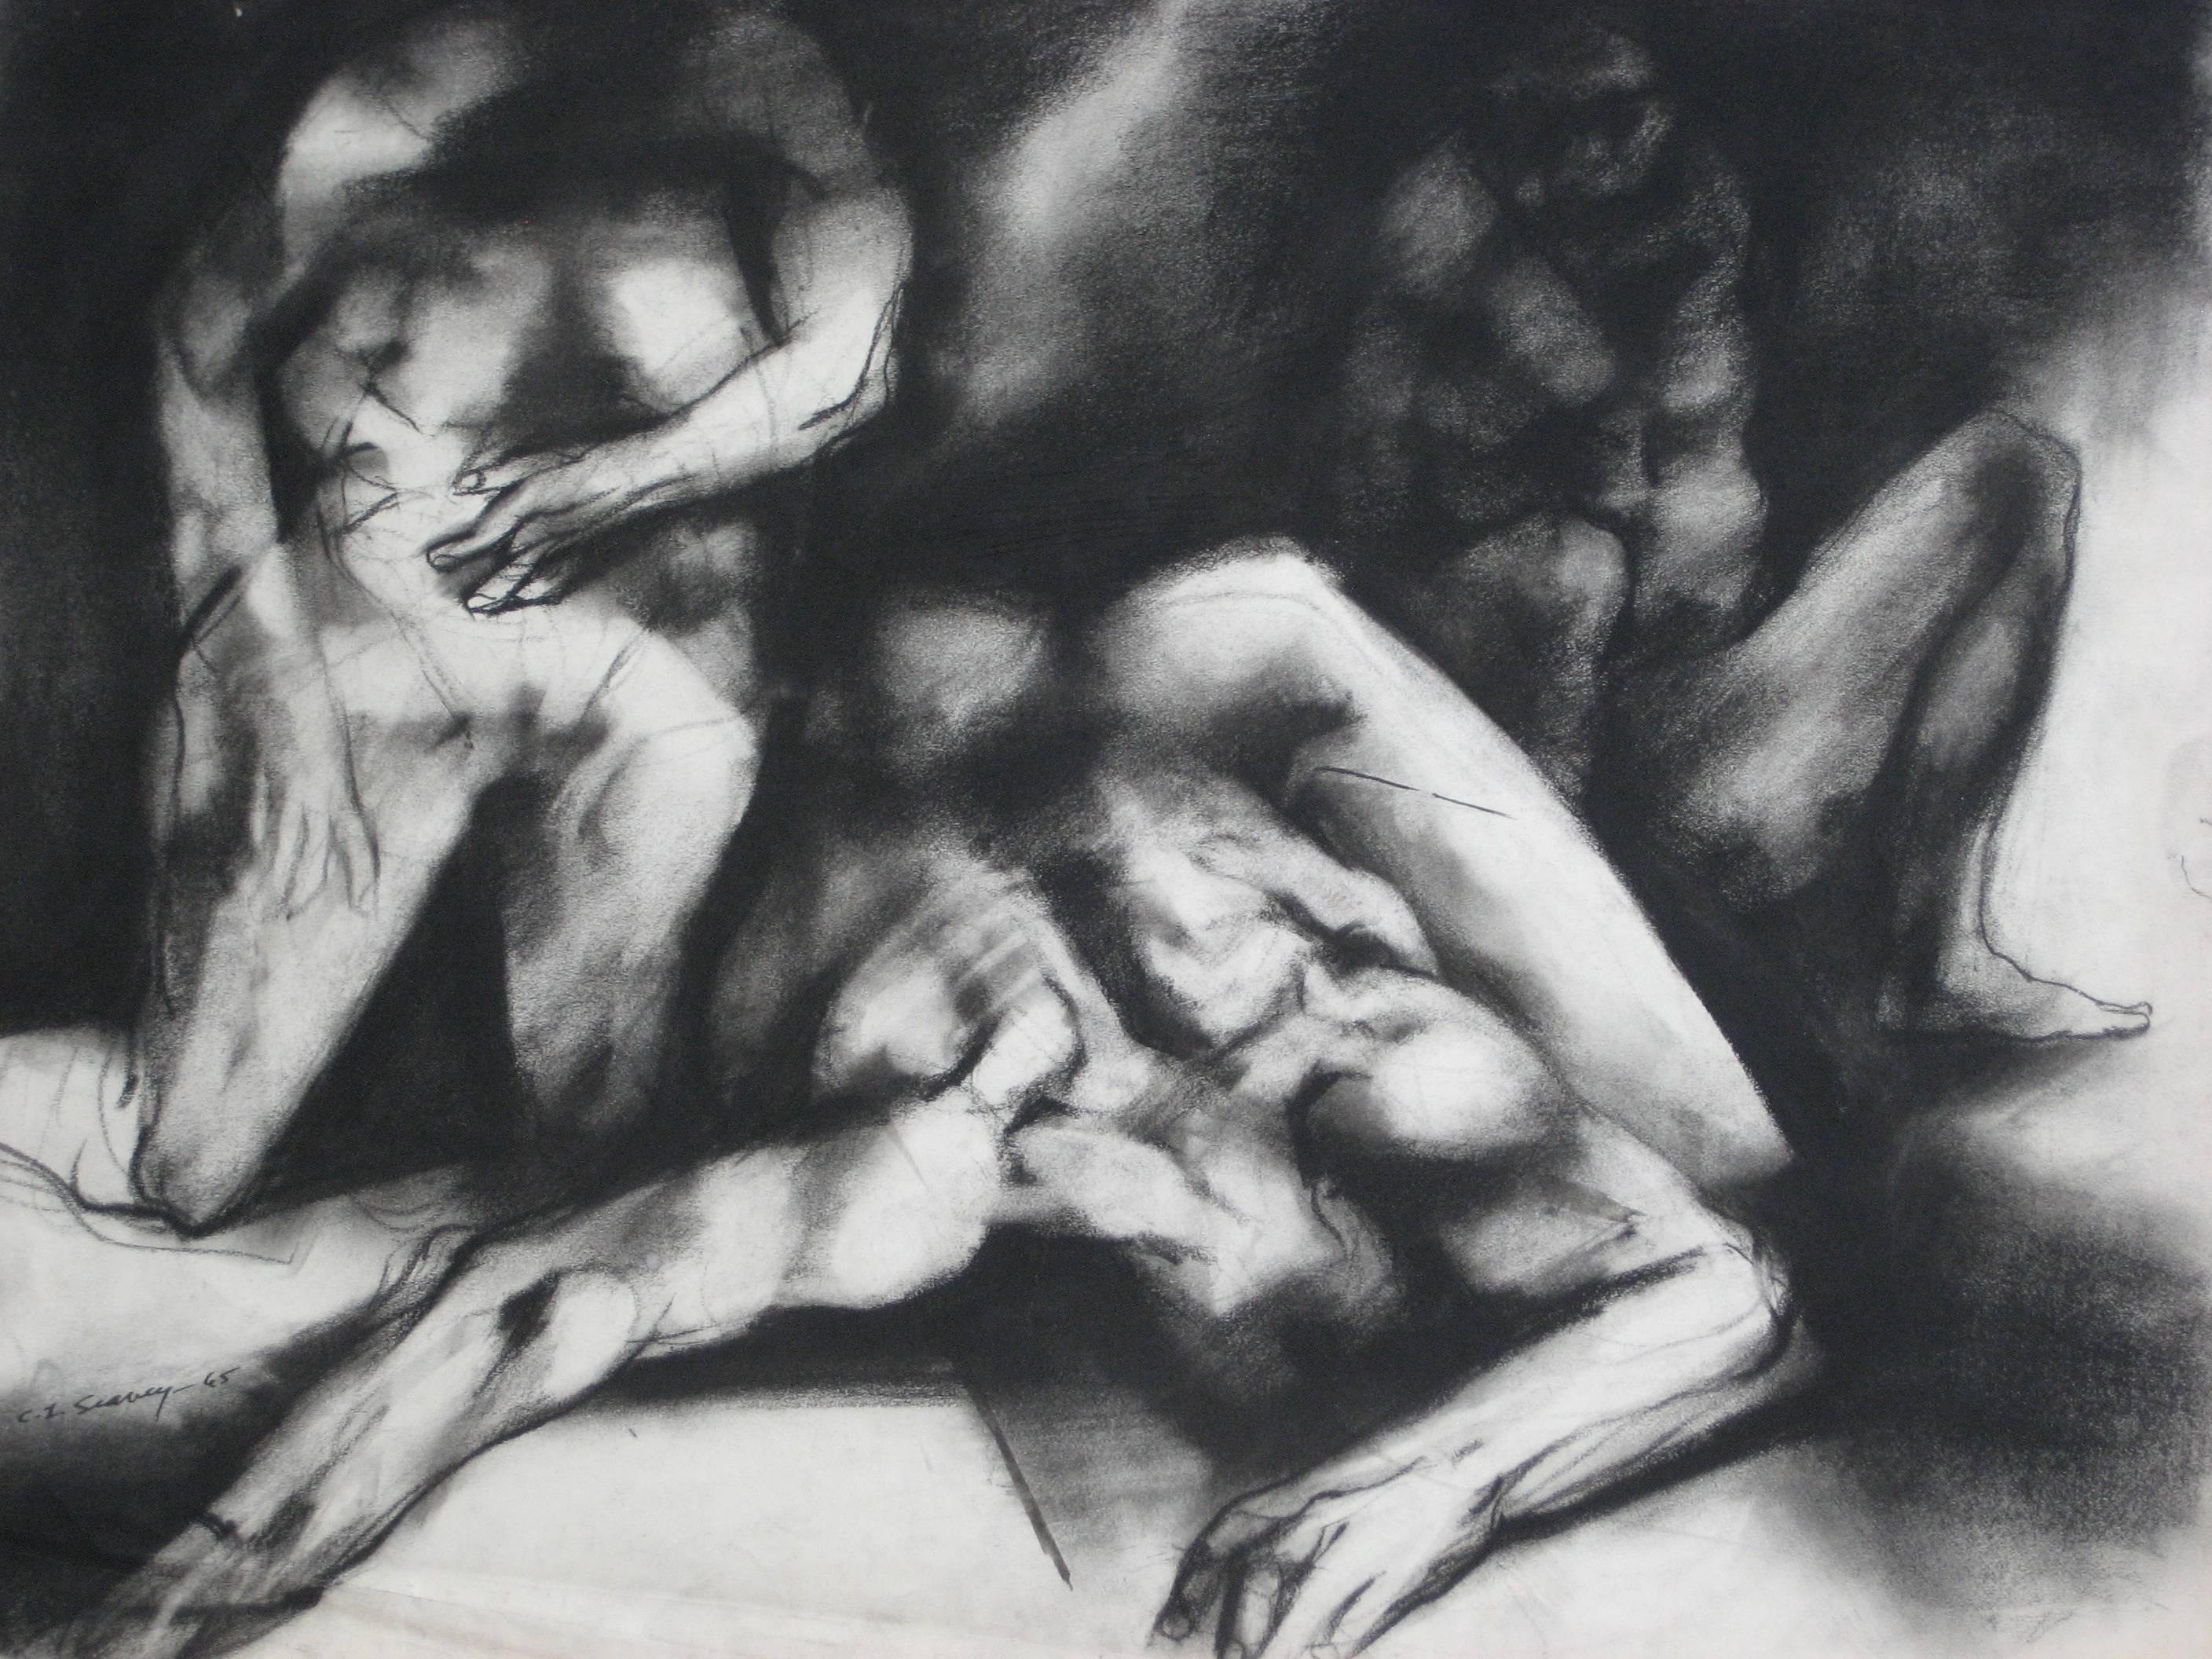 Monochromatic Expressionist Figures, Framed Charcoal Drawing, 1965 - Art by Clyde I. Seavey Jr.